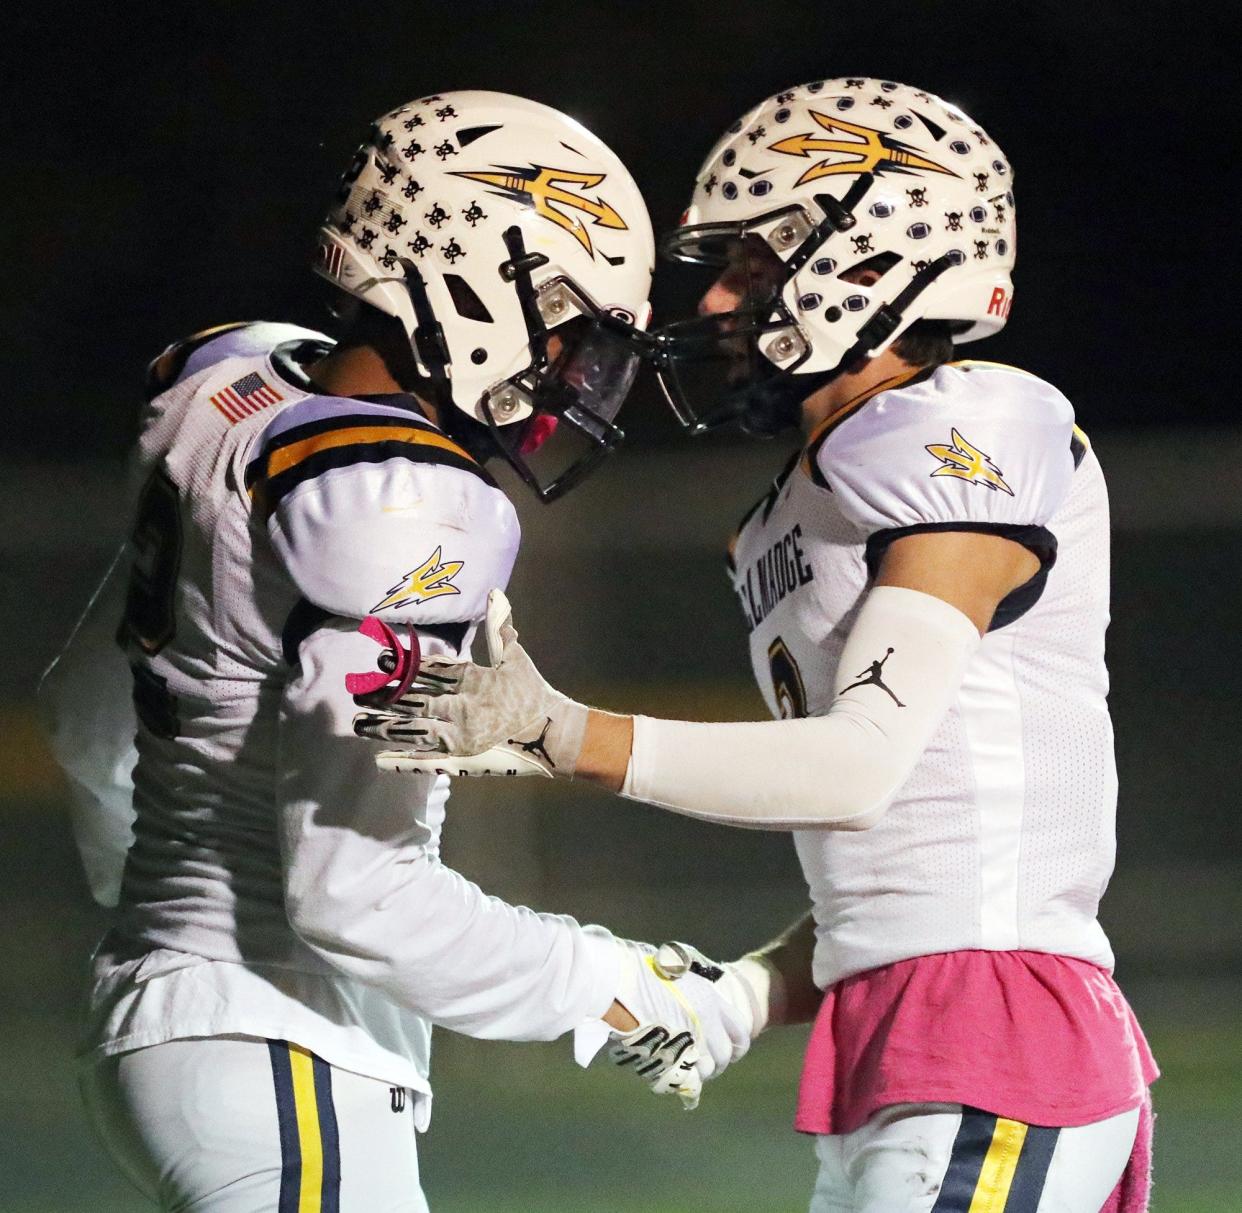 Tallmadge wide receiver Collin Dixon, left, shakes hands with teammate Mason Dexter after scoring during the first half of a high school football game against the Copley Indians, Friday, Oct. 15, 2021, in Copley, Ohio. [Jeff Lange/Beacon Journal]